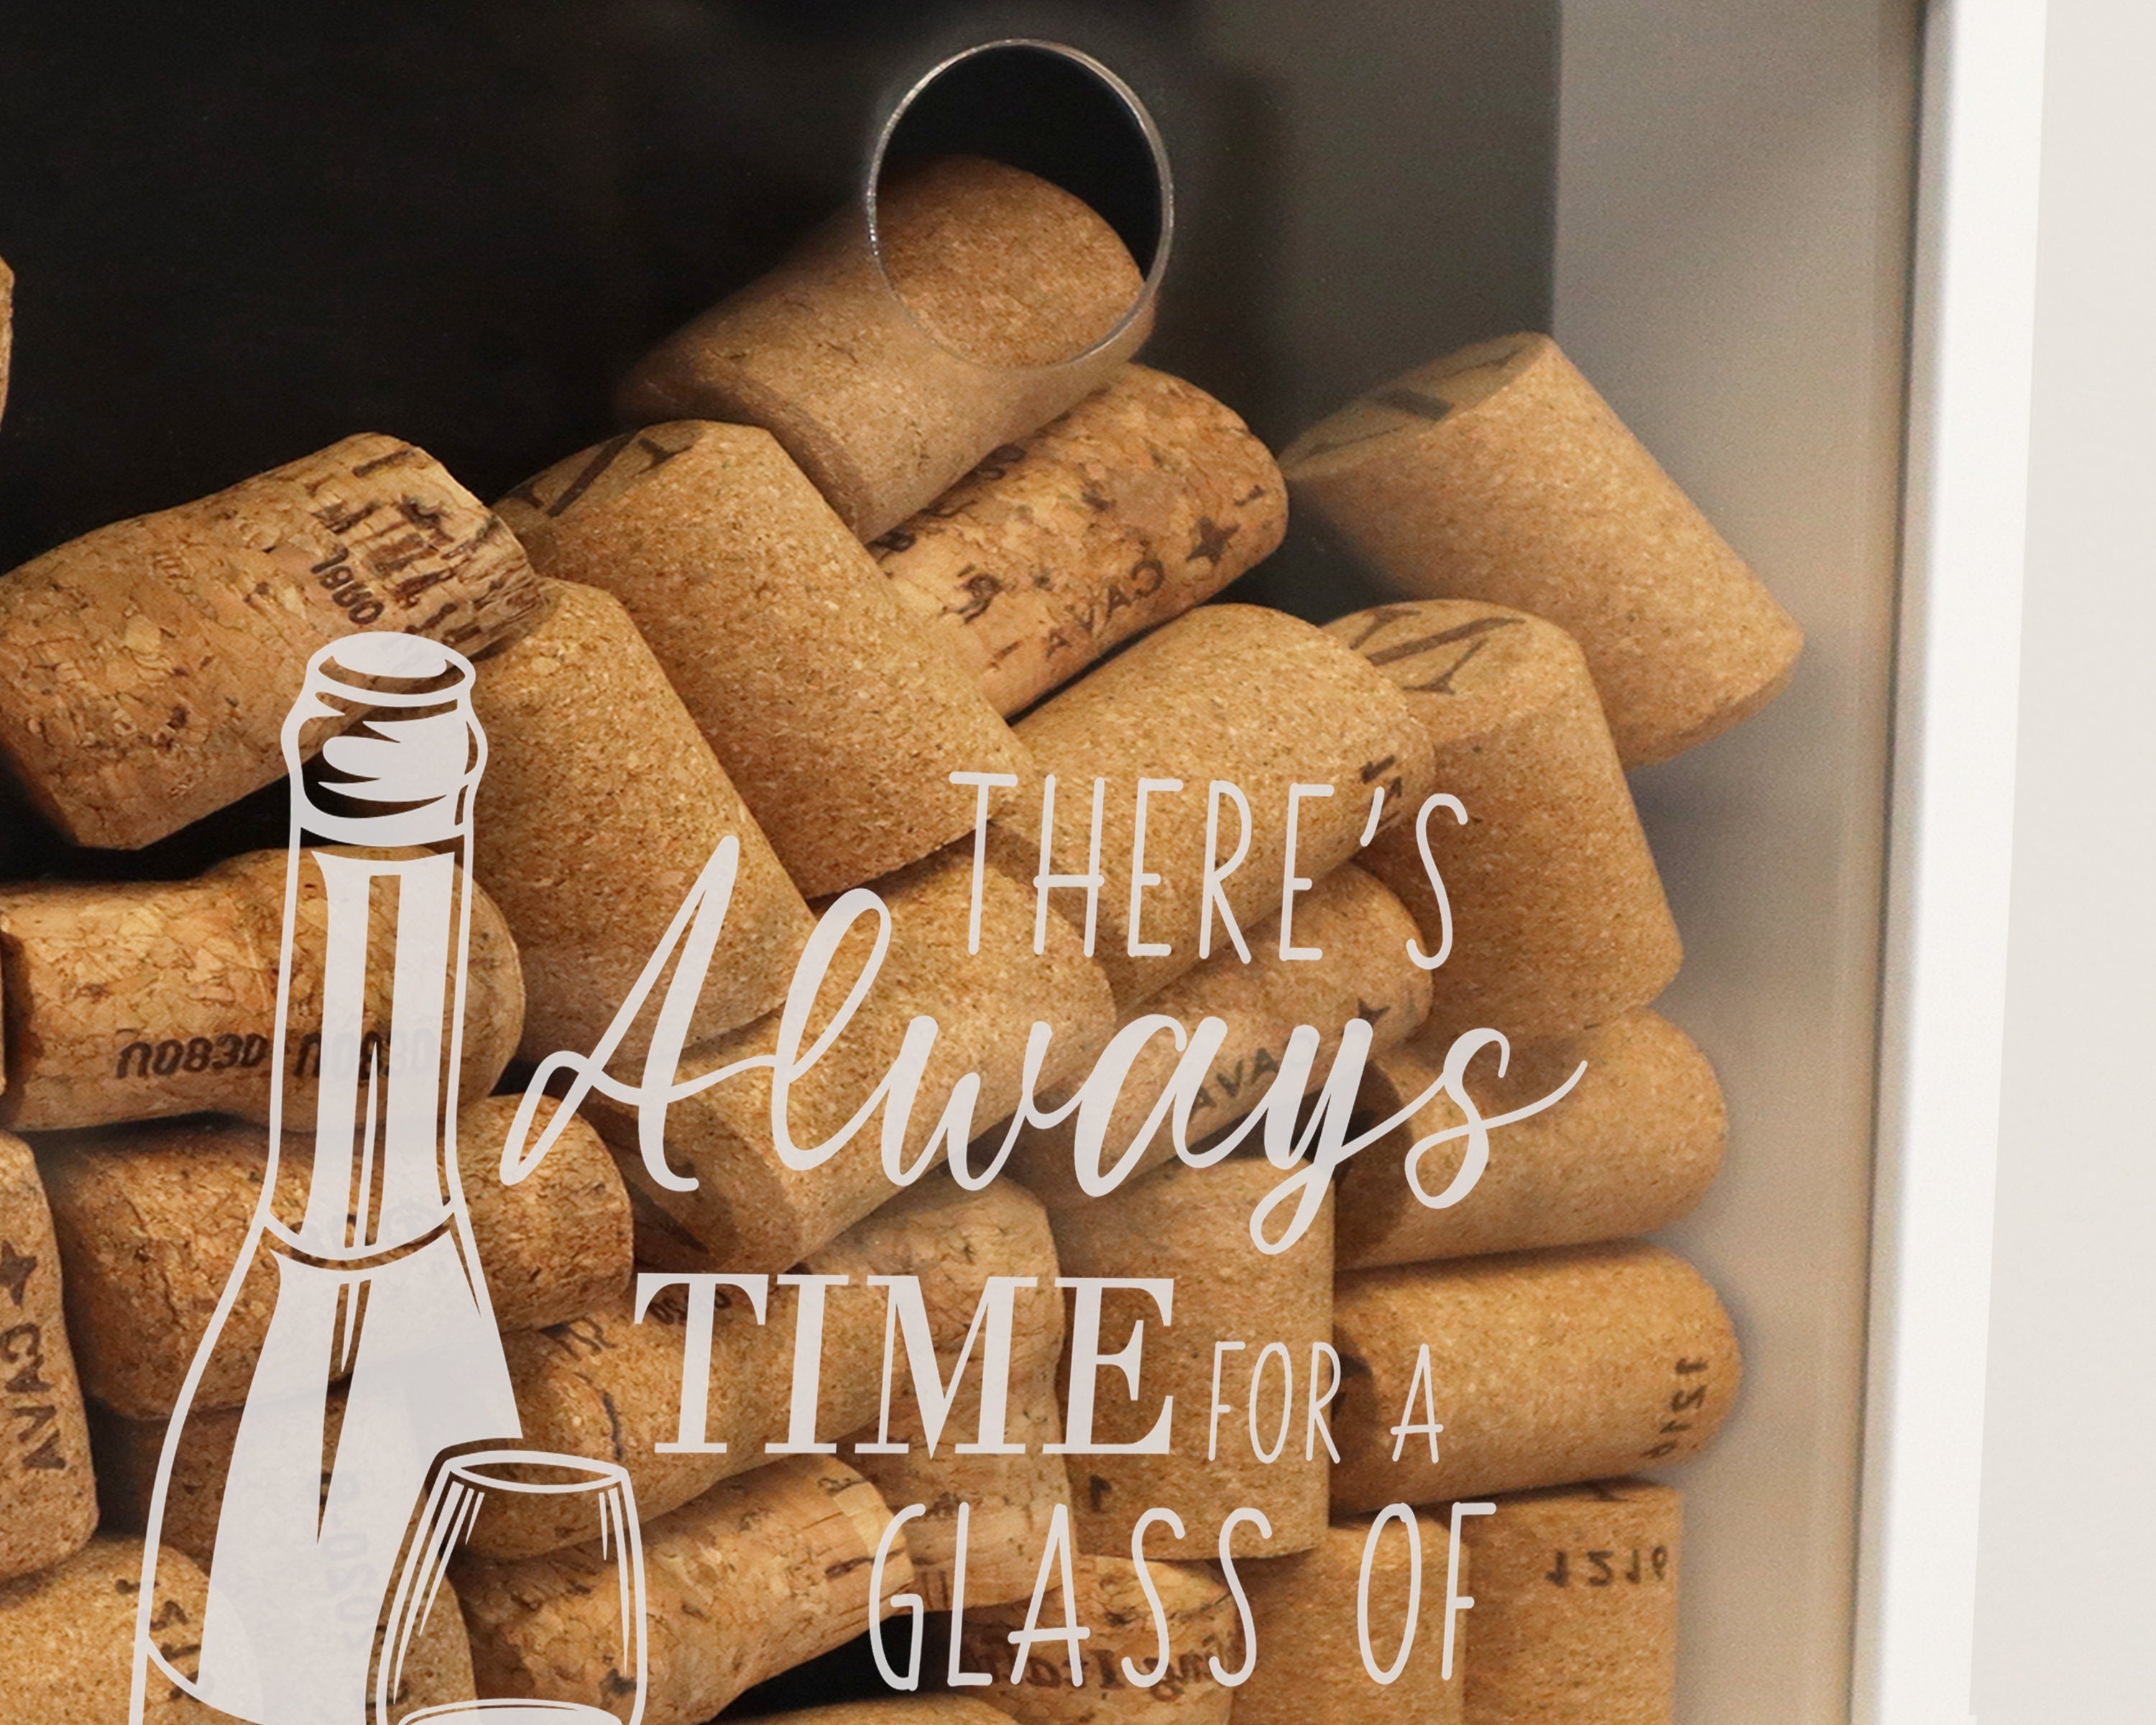 There's Always Time for a Glass of Wine Cork Box, Wine Cork Collection Box, Wine Lover Gift, Wine Cork Display, Wine Engagement Gift